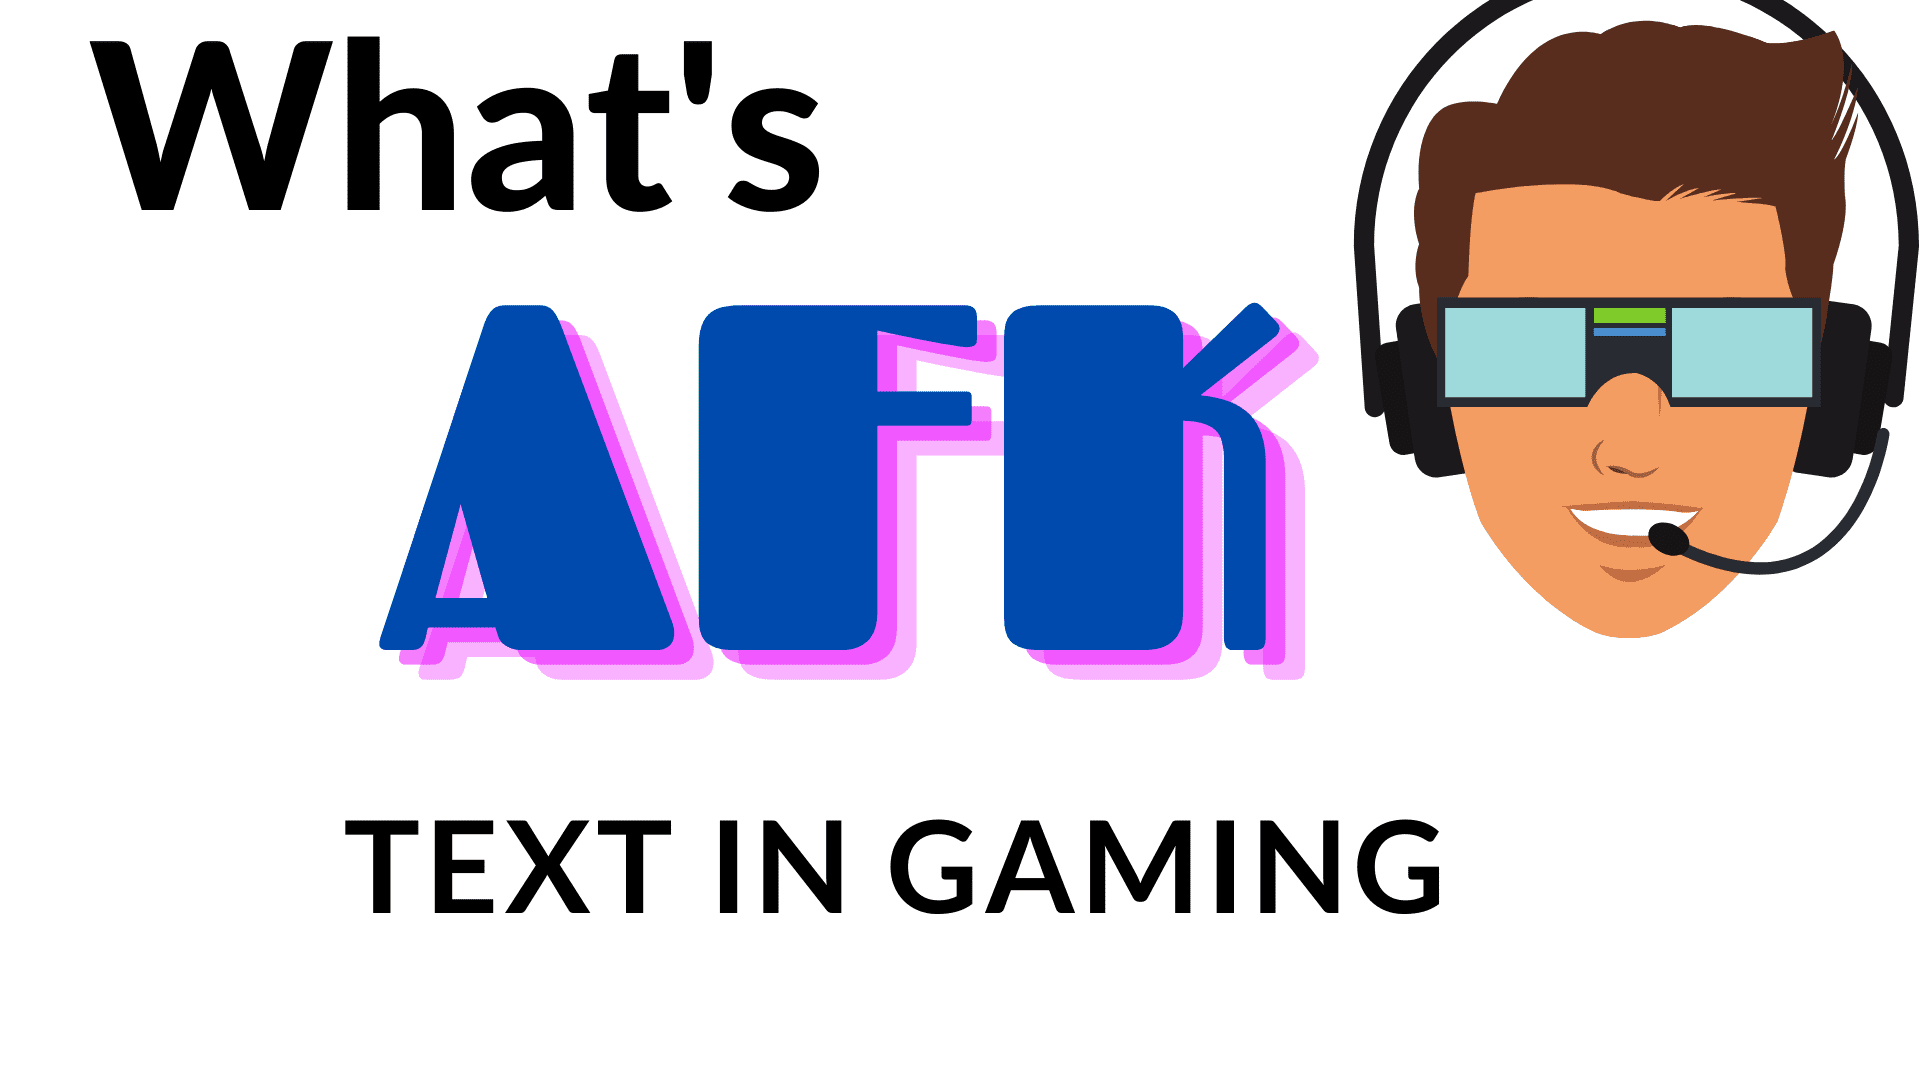 This abbreviation is used in gaming by many online multiplayer gamers. This means that if one is AFK, then that means he is inactive on the game.